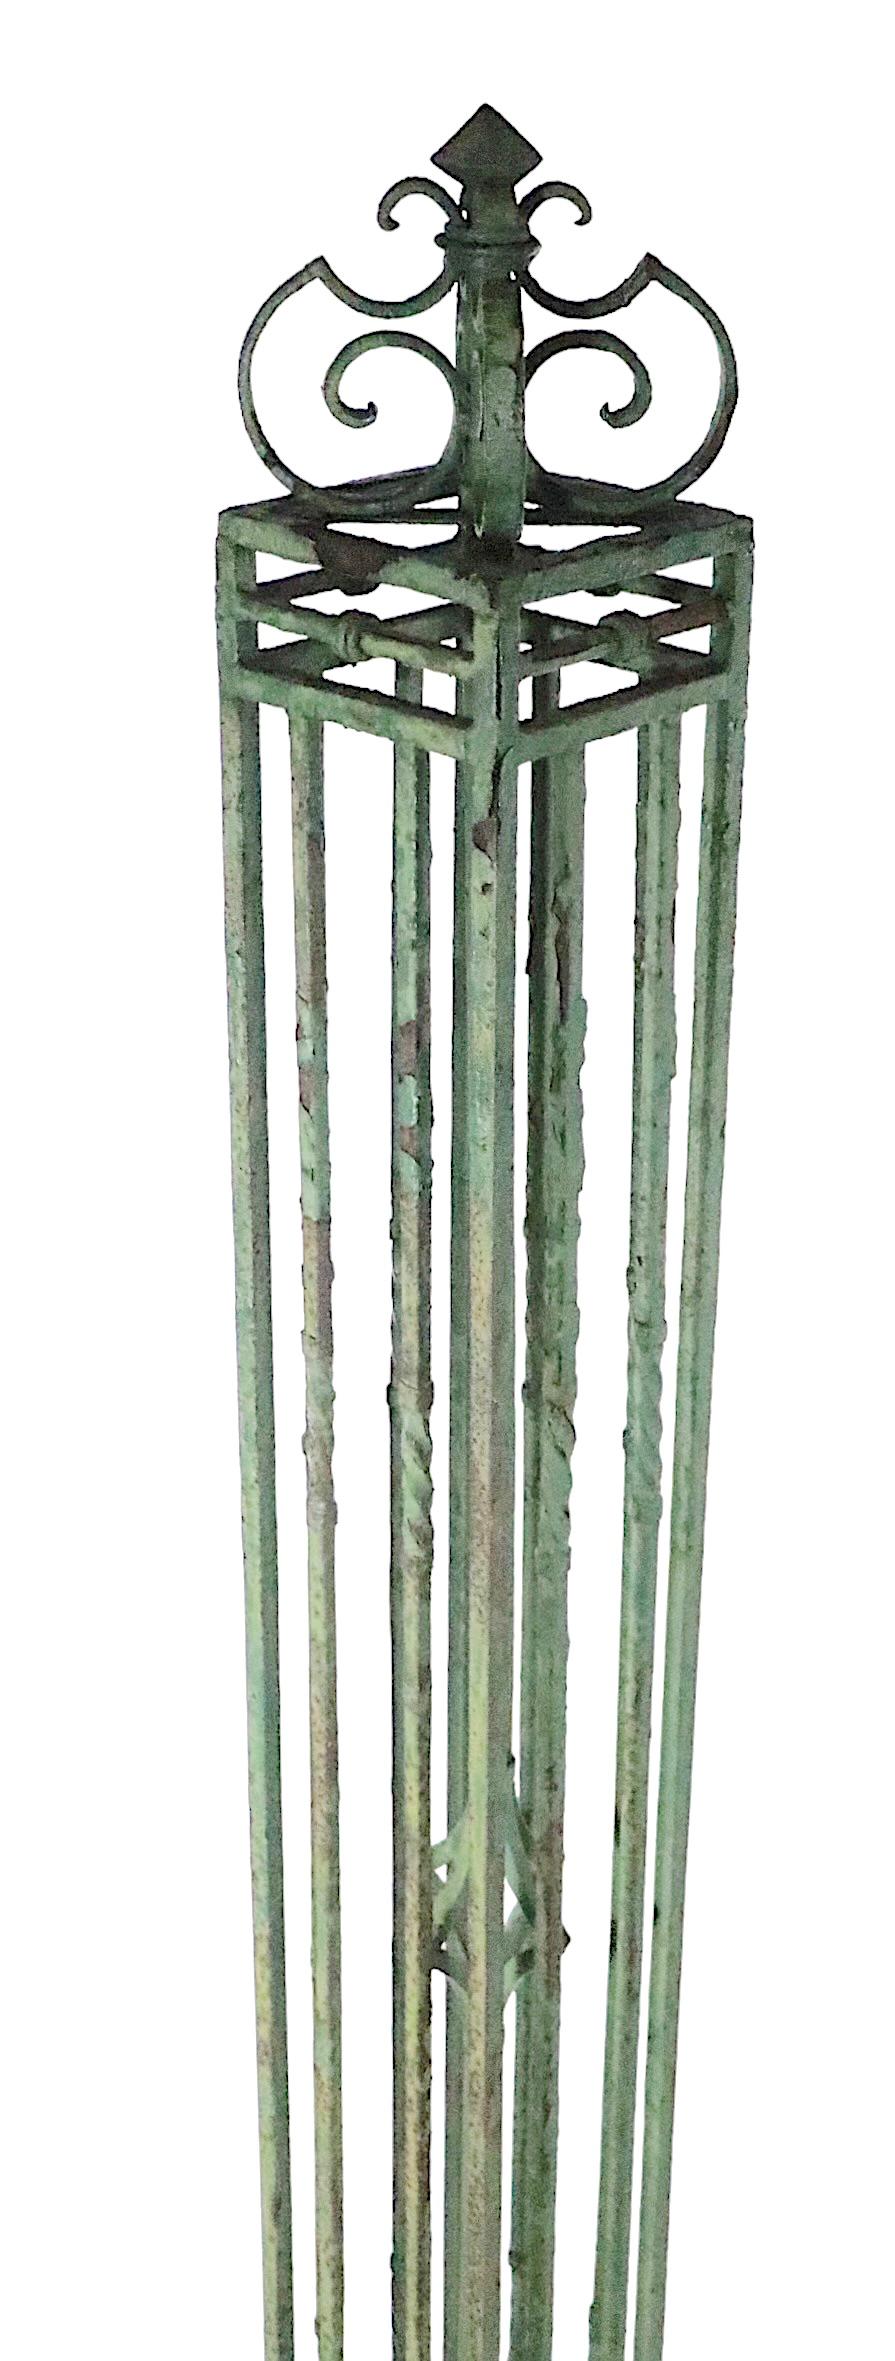 Impressive architectural iron fence post in original old paint finish, constructed of cast and wrought iron. The post features a exterior cage of repeating vertical shafts, on a stepped base, with a decorative scrollwork top. The finish shows